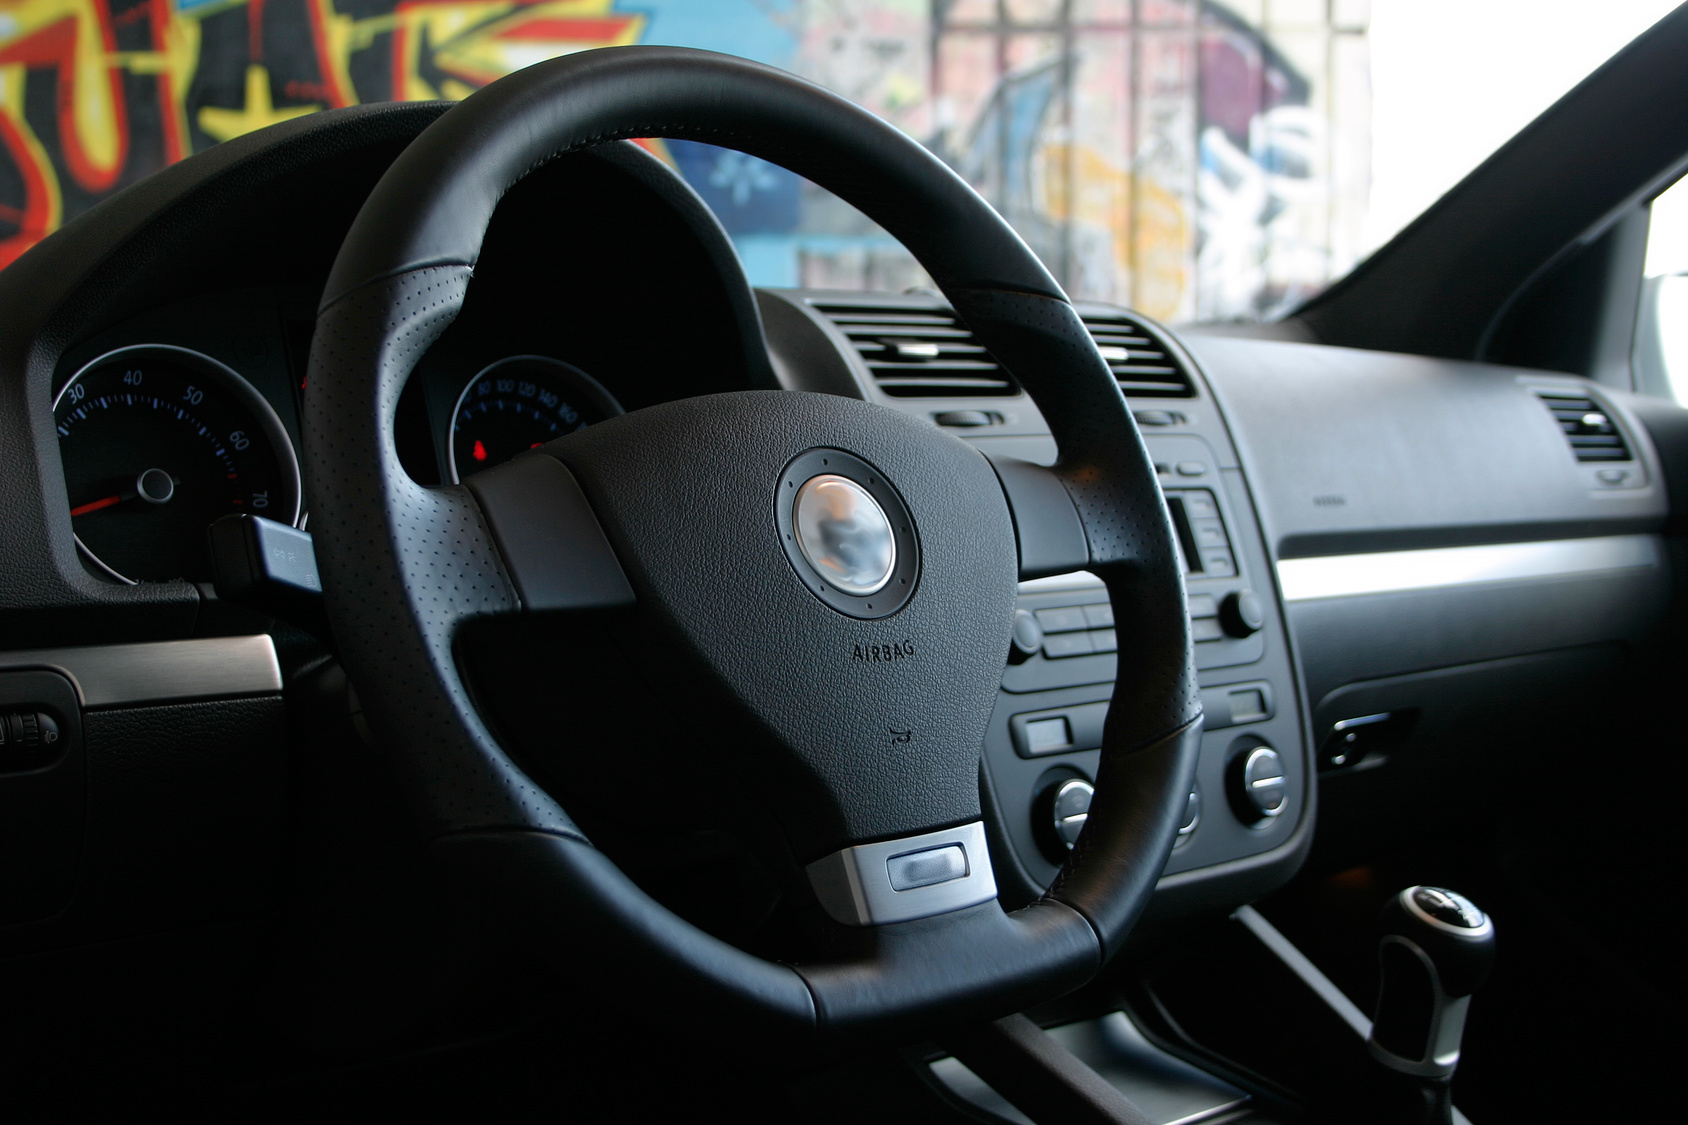 The interior steering wheel of a Volkswagen vehicle. Colorful walls in the background.